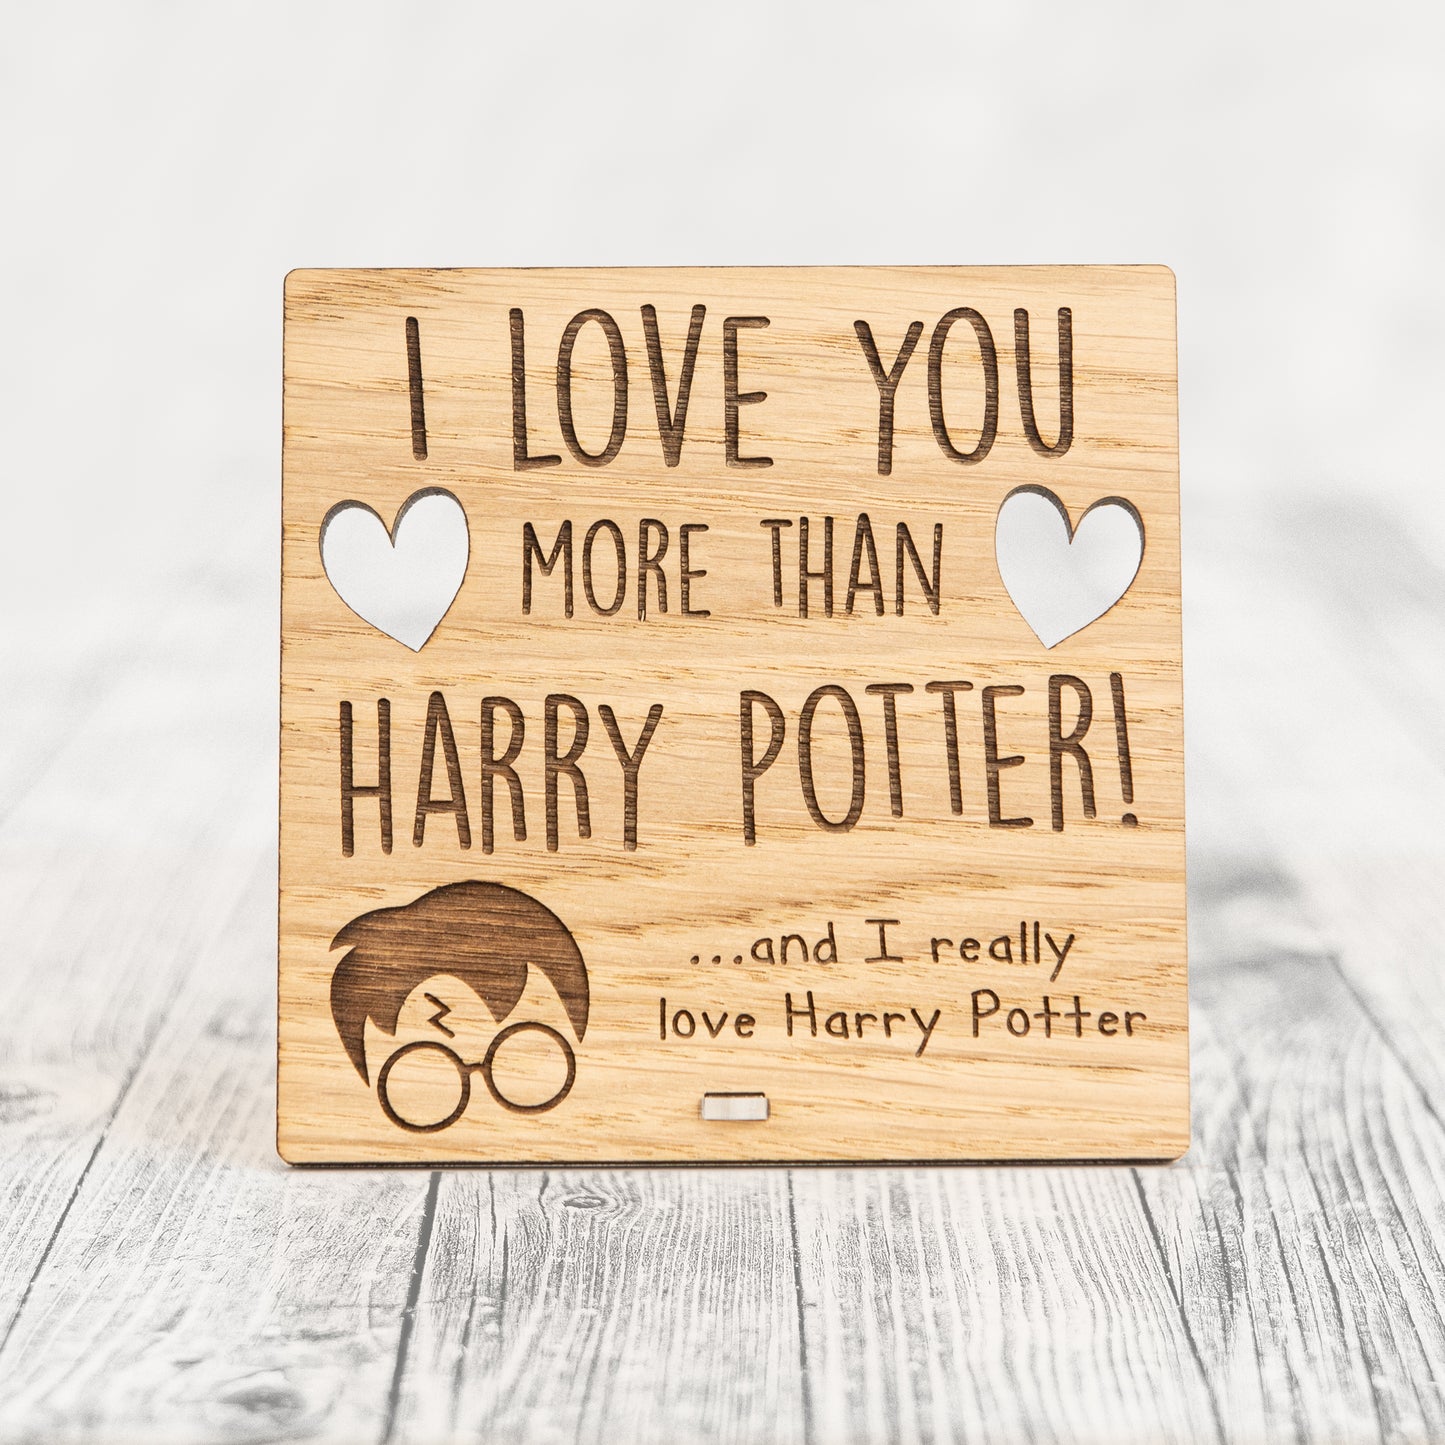 I Love You More Than HARRY POTTER - Wooden Valentine's Day Plaque